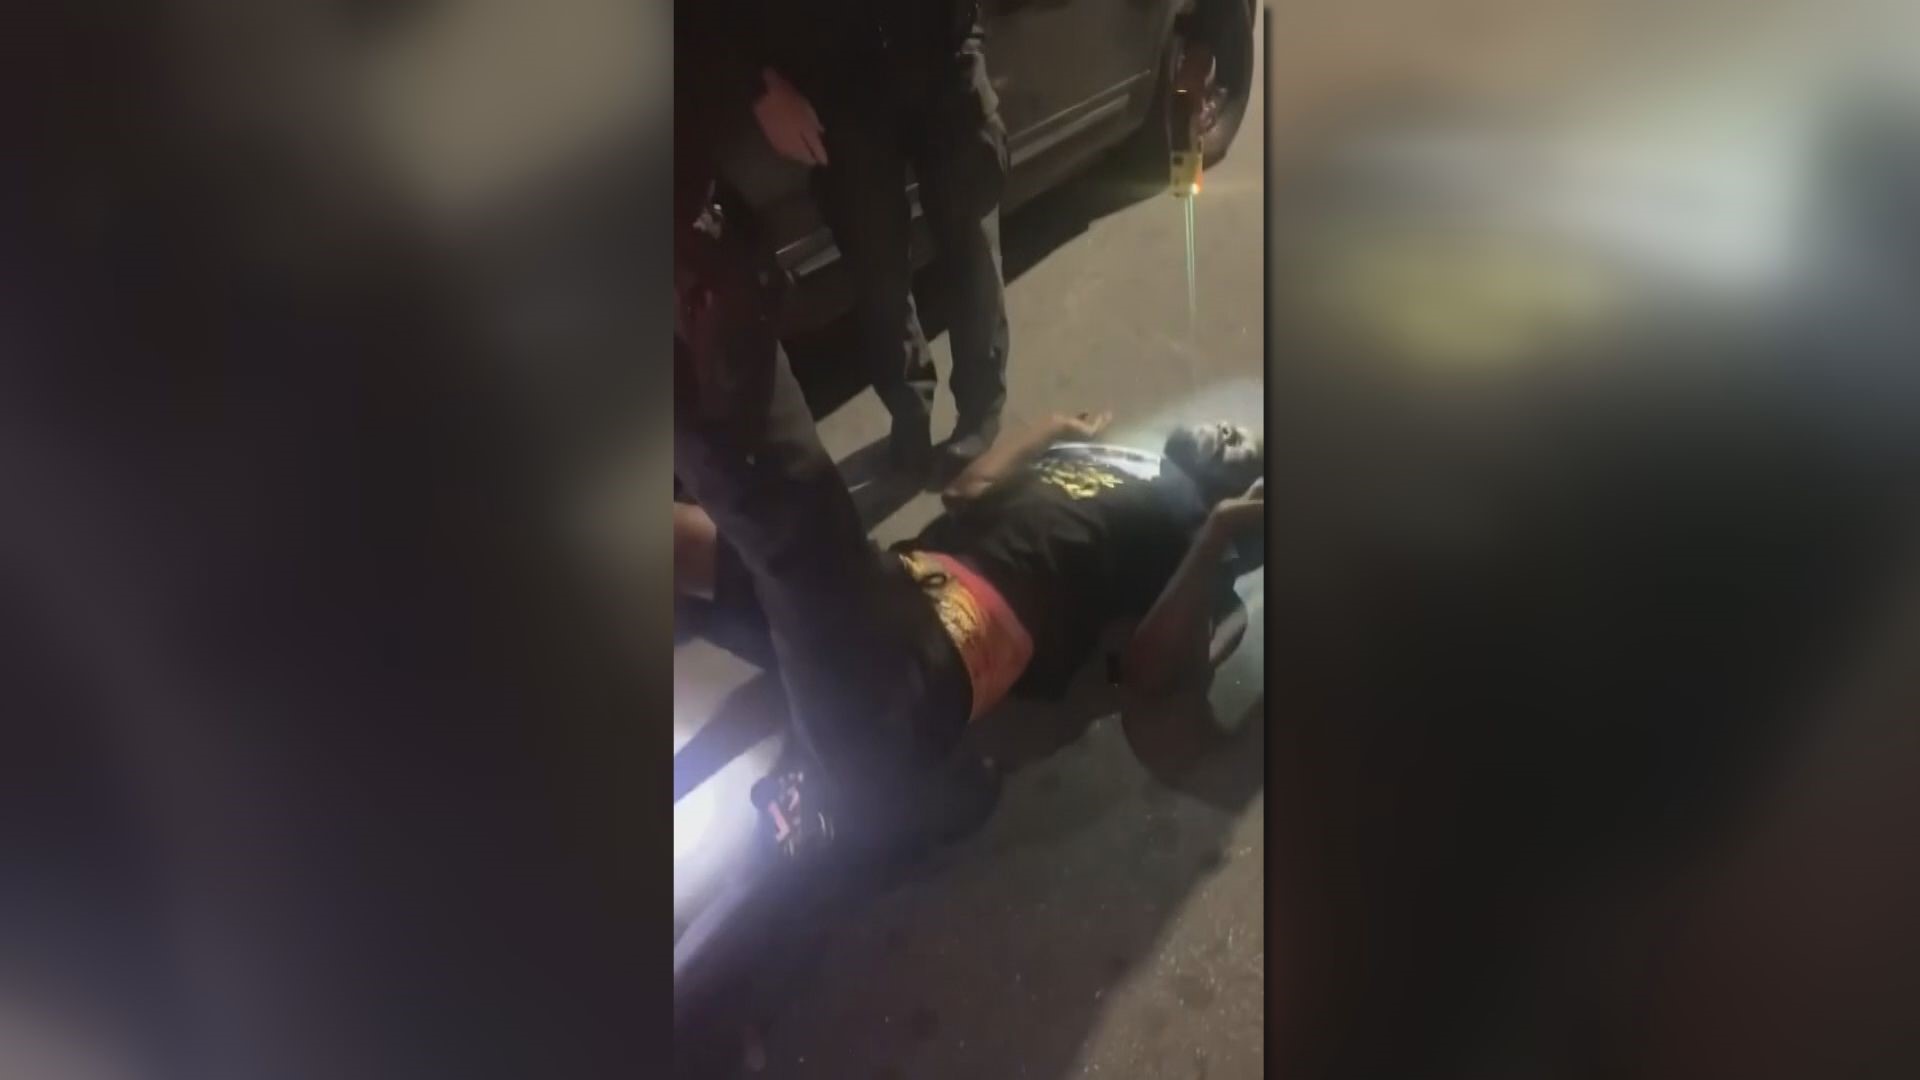 Antwan Glover was beaten and tased in front of his family in December 2022. The violent arrest was captured on video by a bystander.